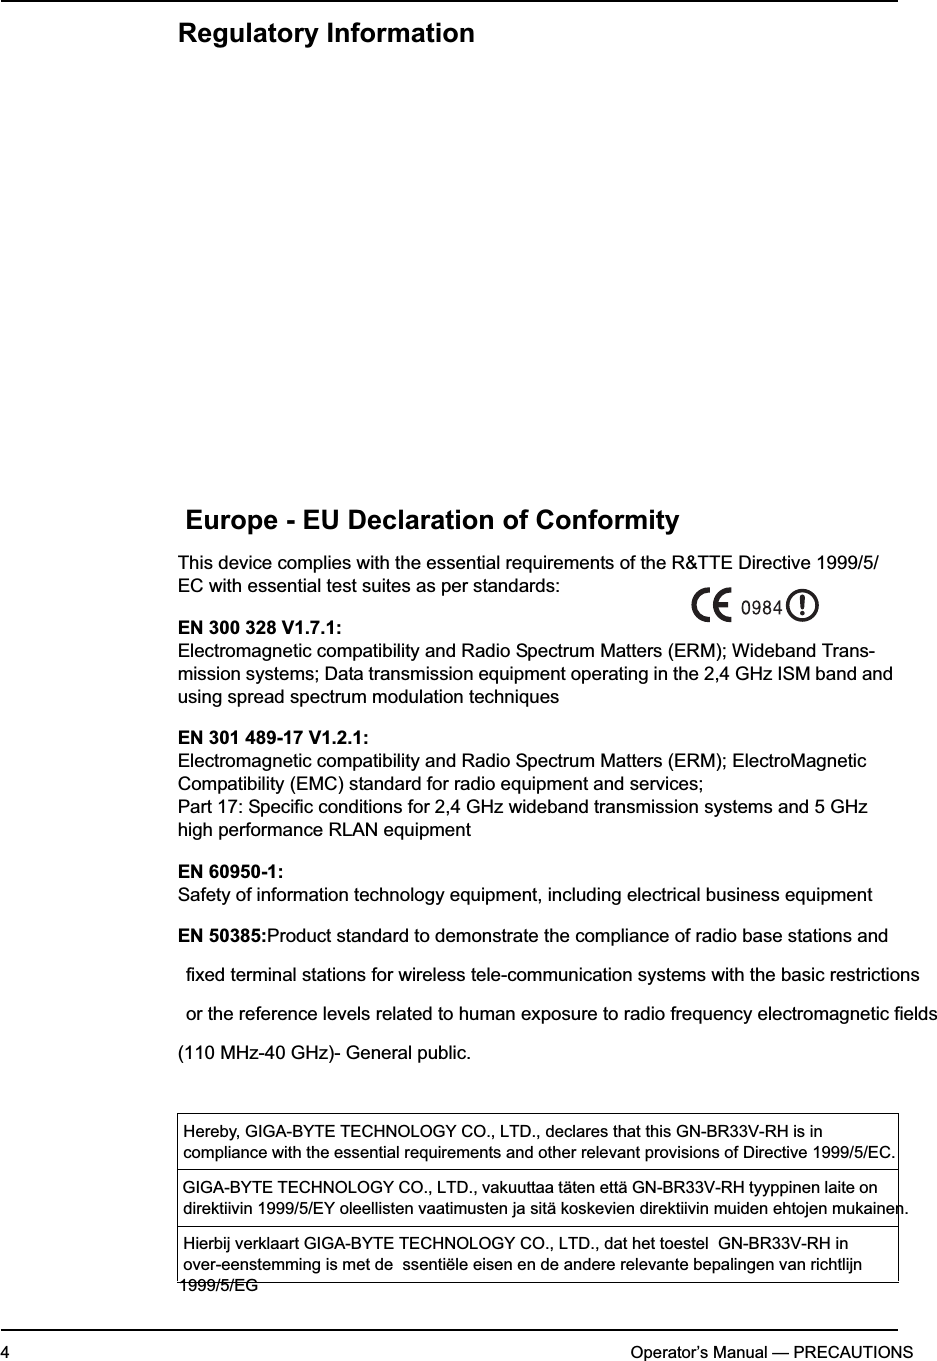 4Operator’s Manual — PRECAUTIONSRegulatory InformationEurope - EU Declaration of ConformityThis device complies with the essential requirements of the R&amp;TTE Directive 1999/5/EC with essential test suites as per standards:EN 300 328 V1.7.1:Electromagnetic compatibility and Radio Spectrum Matters (ERM); Wideband Trans-mission systems; Data transmission equipment operating in the 2,4 GHz ISM band and using spread spectrum modulation techniquesEN 301 489-17 V1.2.1:Electromagnetic compatibility and Radio Spectrum Matters (ERM); ElectroMagnetic Compatibility (EMC) standard for radio equipment and services; Part 17: Specific conditions for 2,4 GHz wideband transmission systems and 5 GHz high performance RLAN equipmentEN 60950-1:Safety of information technology equipment, including electrical business equipmentEN 50385:Product standard to demonstrate the compliance of radio base stations andfixed terminal stations for wireless tele-communication systems with the basic restrictionsor the reference levels related to human exposure to radio frequency electromagnetic fields(110 MHz-40 GHz)- General public. Hereby, GIGA-BYTE TECHNOLOGY CO., LTD., declares that this GN-BR33V-RH is in    compliance with the essential requirements and other relevant provisions of Directive 1999/5/EC.   GIGA-BYTE TECHNOLOGY CO., LTD., vakuuttaa täten että GN-BR33V-RH tyyppinen laite on   direktiivin 1999/5/EY oleellisten vaatimusten ja sitä koskevien direktiivin muiden ehtojen mukainen.Hierbij verklaart GIGA-BYTE TECHNOLOGY CO., LTD., dat het toestel  GN-BR33V-RH in   over-eenstemming is met de  ssentiële eisen en de andere relevante bepalingen van richtlijn 1999/5/EG